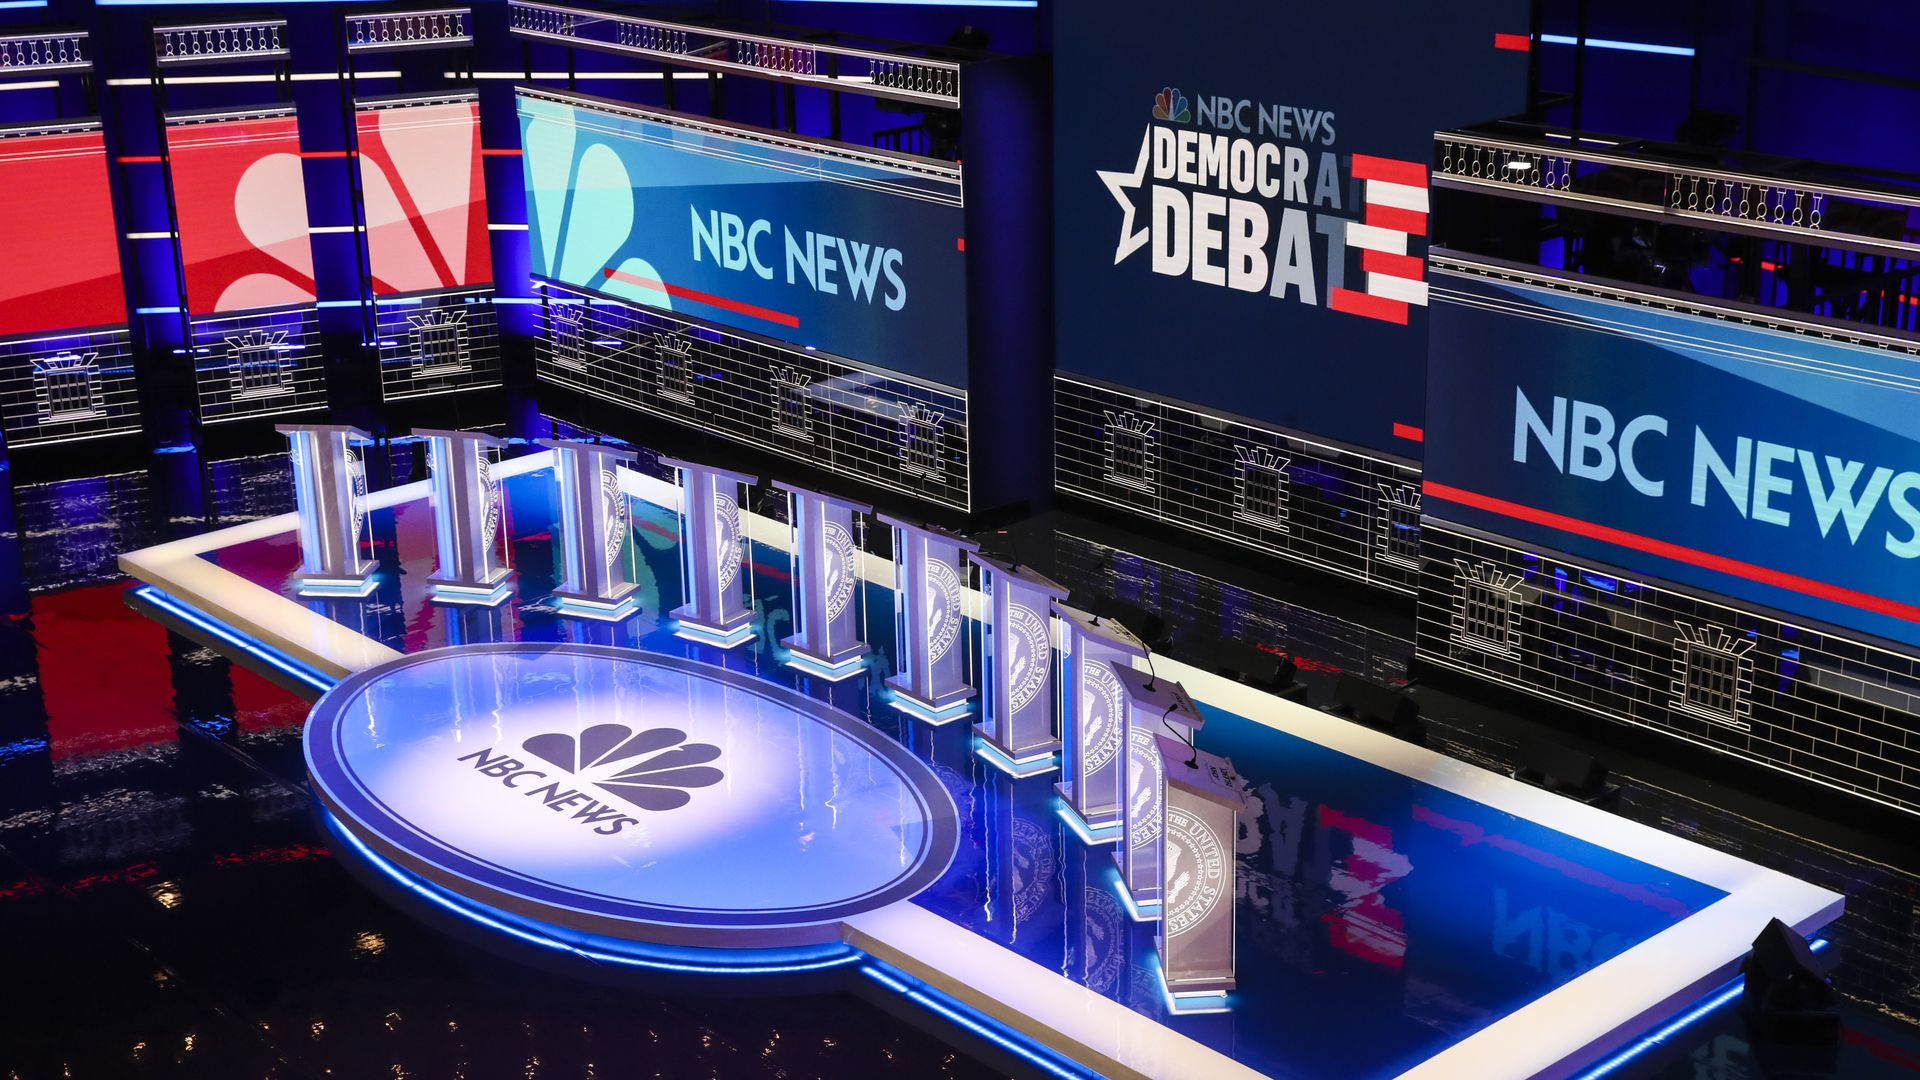 October dates set for 4th round of Democratic primary debates - Axios